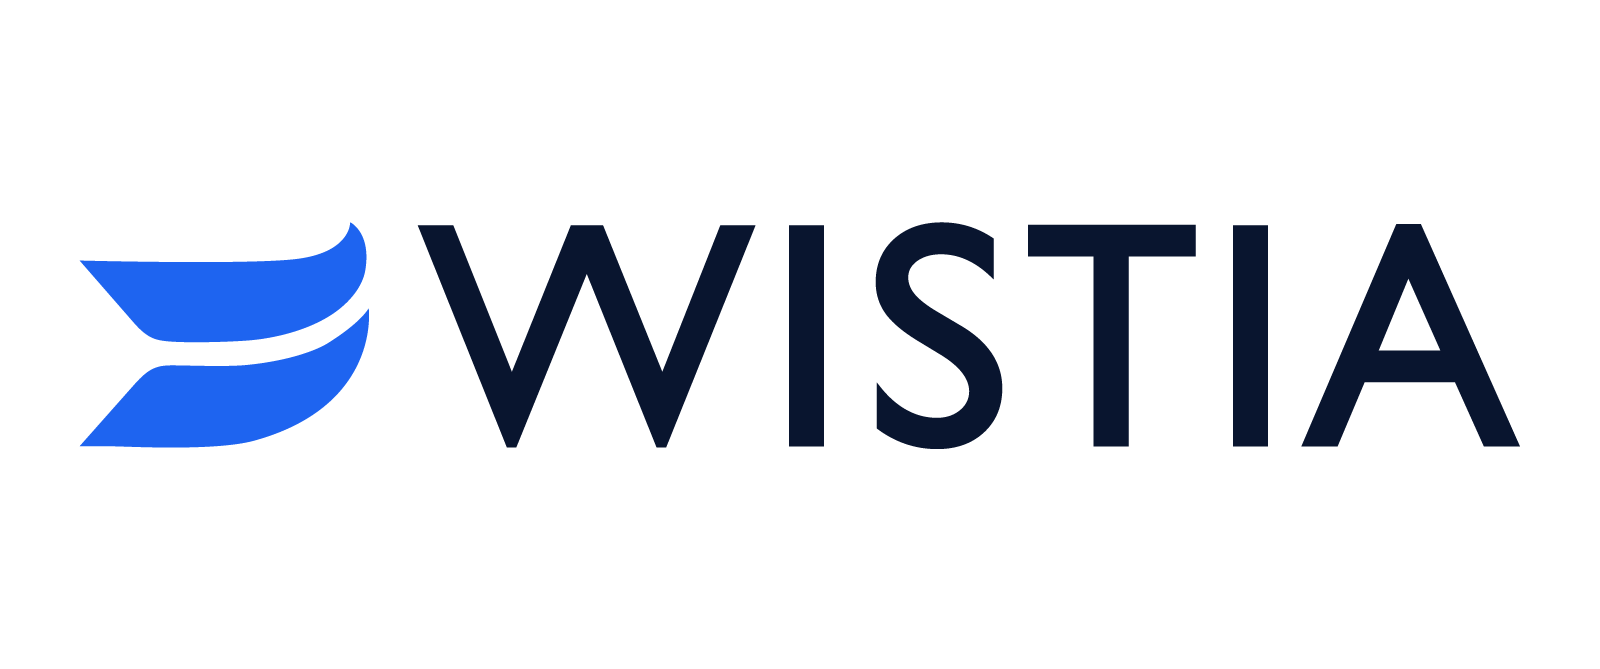 One easy-to-use platform that turns your videos and podcasts into marketing machines · Wistia is proud to help more than 375,000 businesses grow with video.